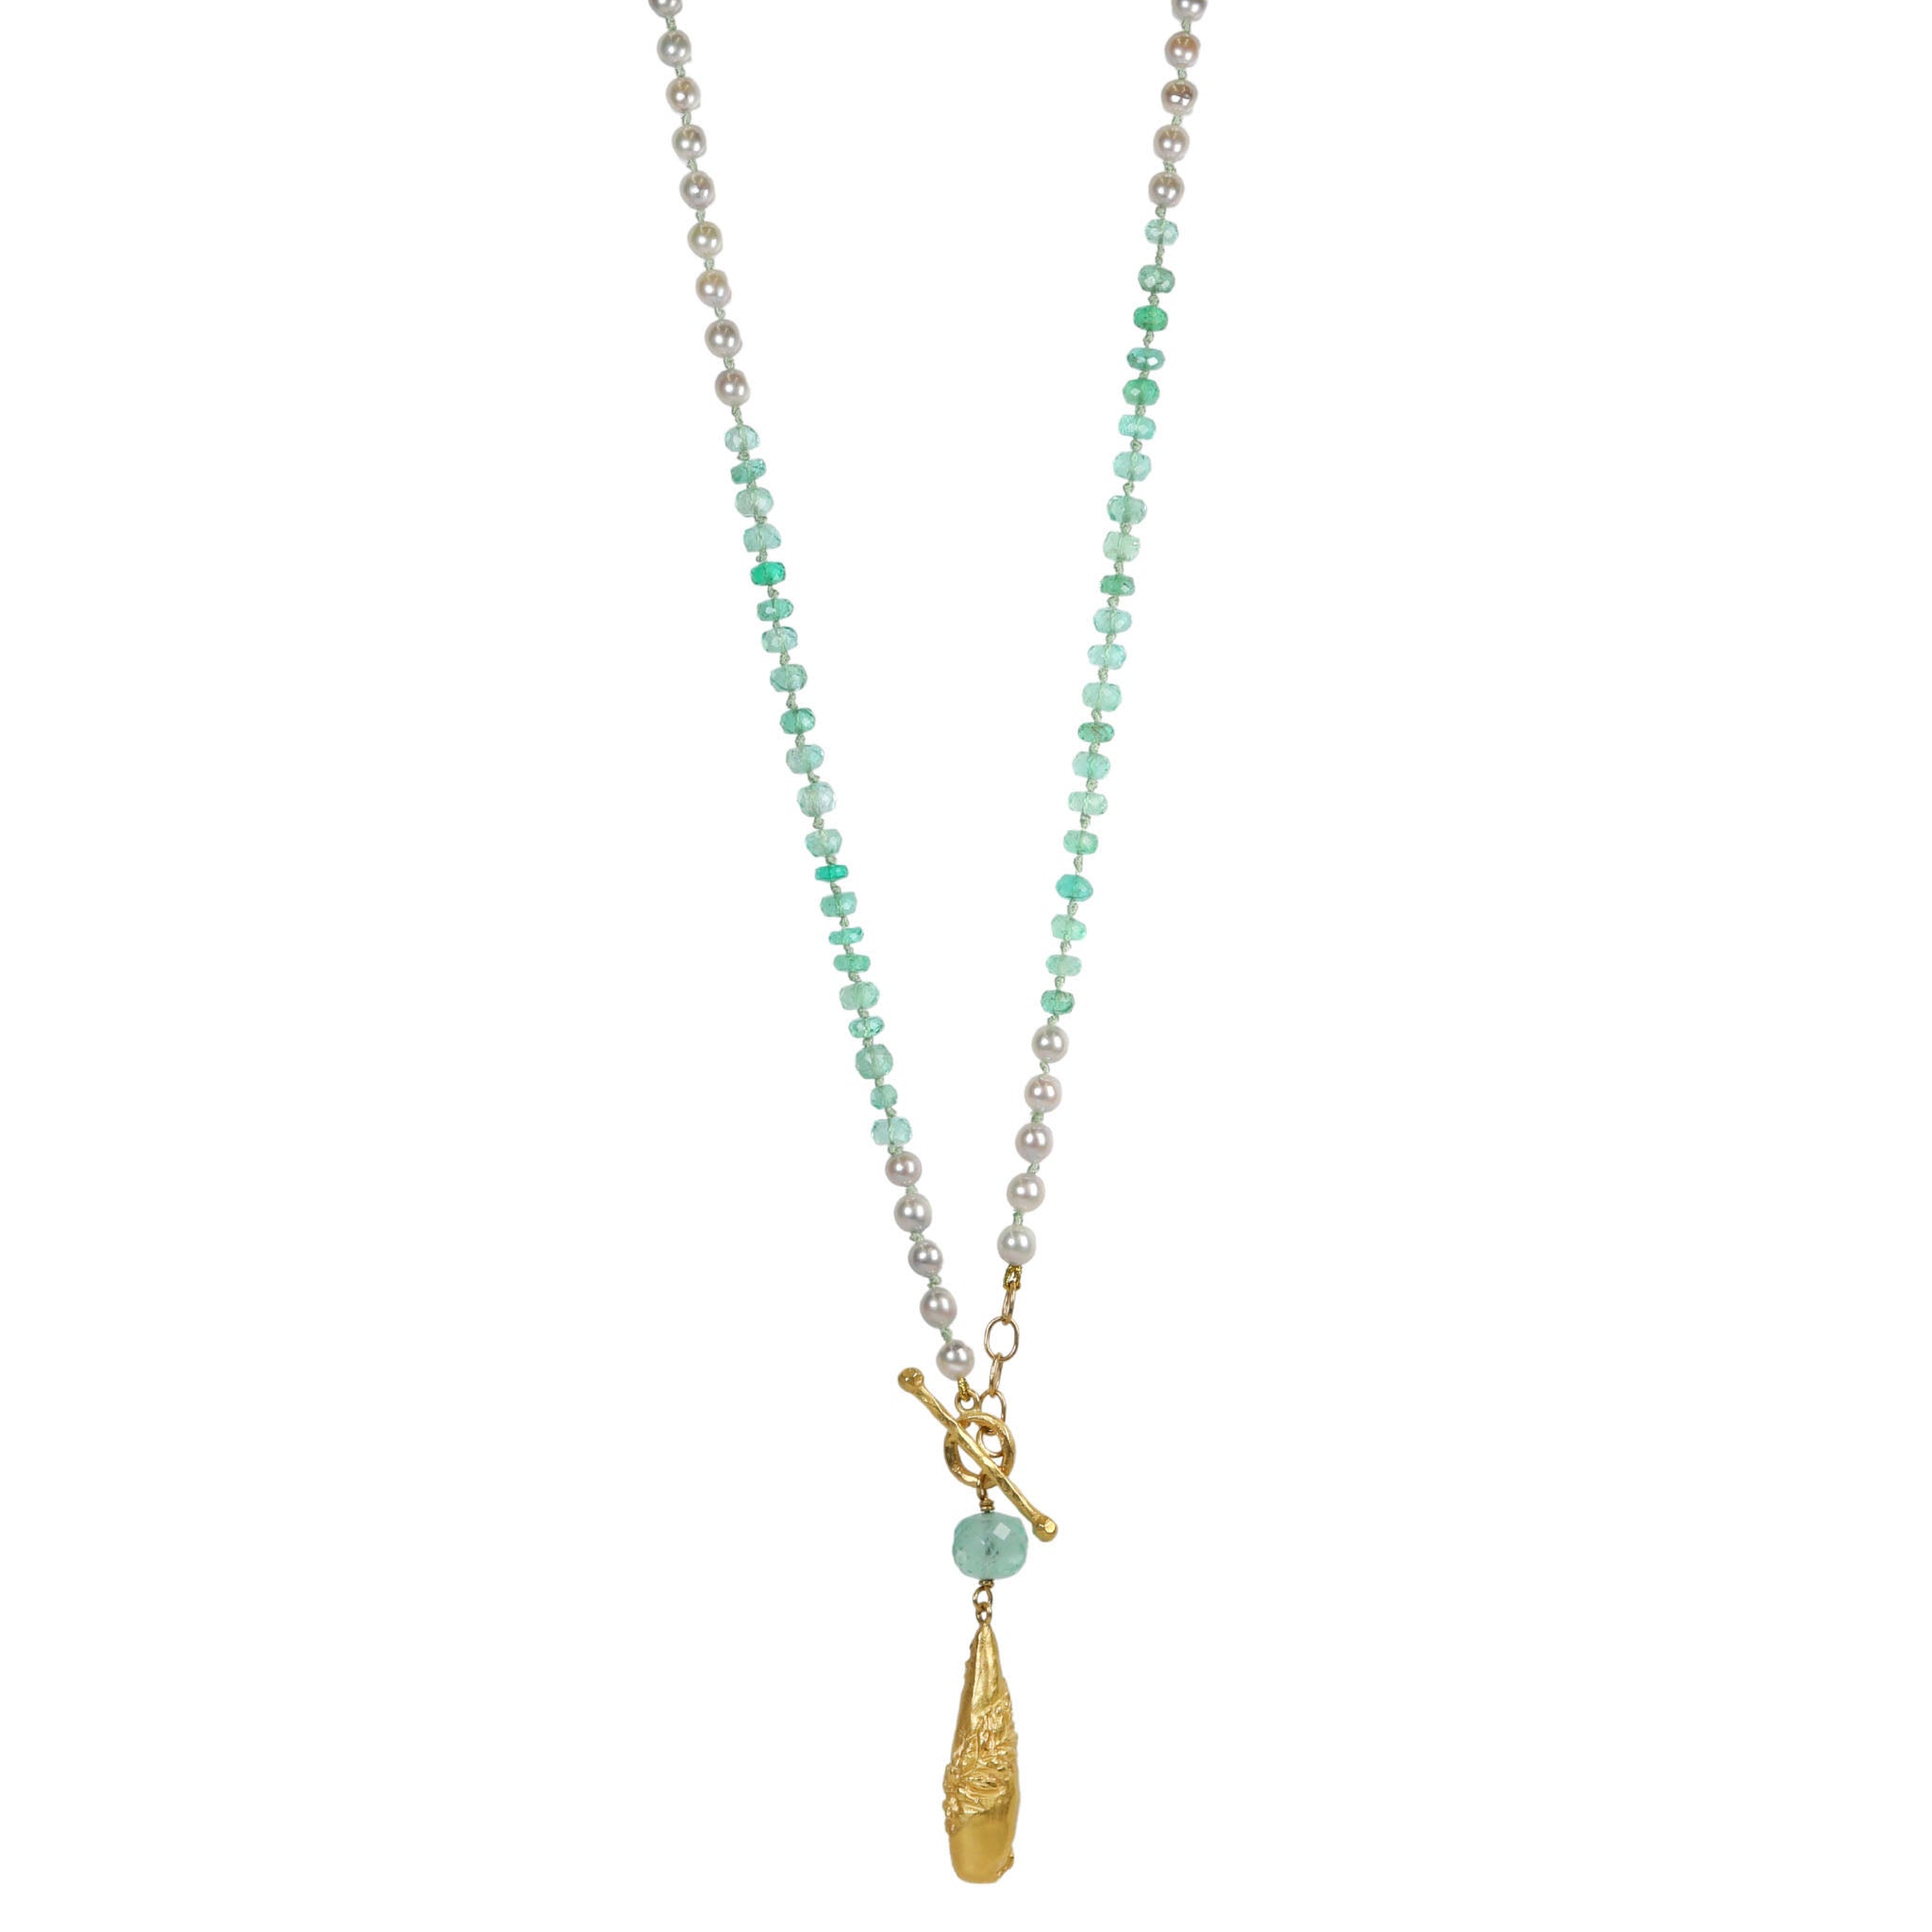 Emerald &amp; Pearl Beaded Necklace with Vine-Wrapped Breaulette Pendant - Peridot Fine Jewelry - Cathy Waterman